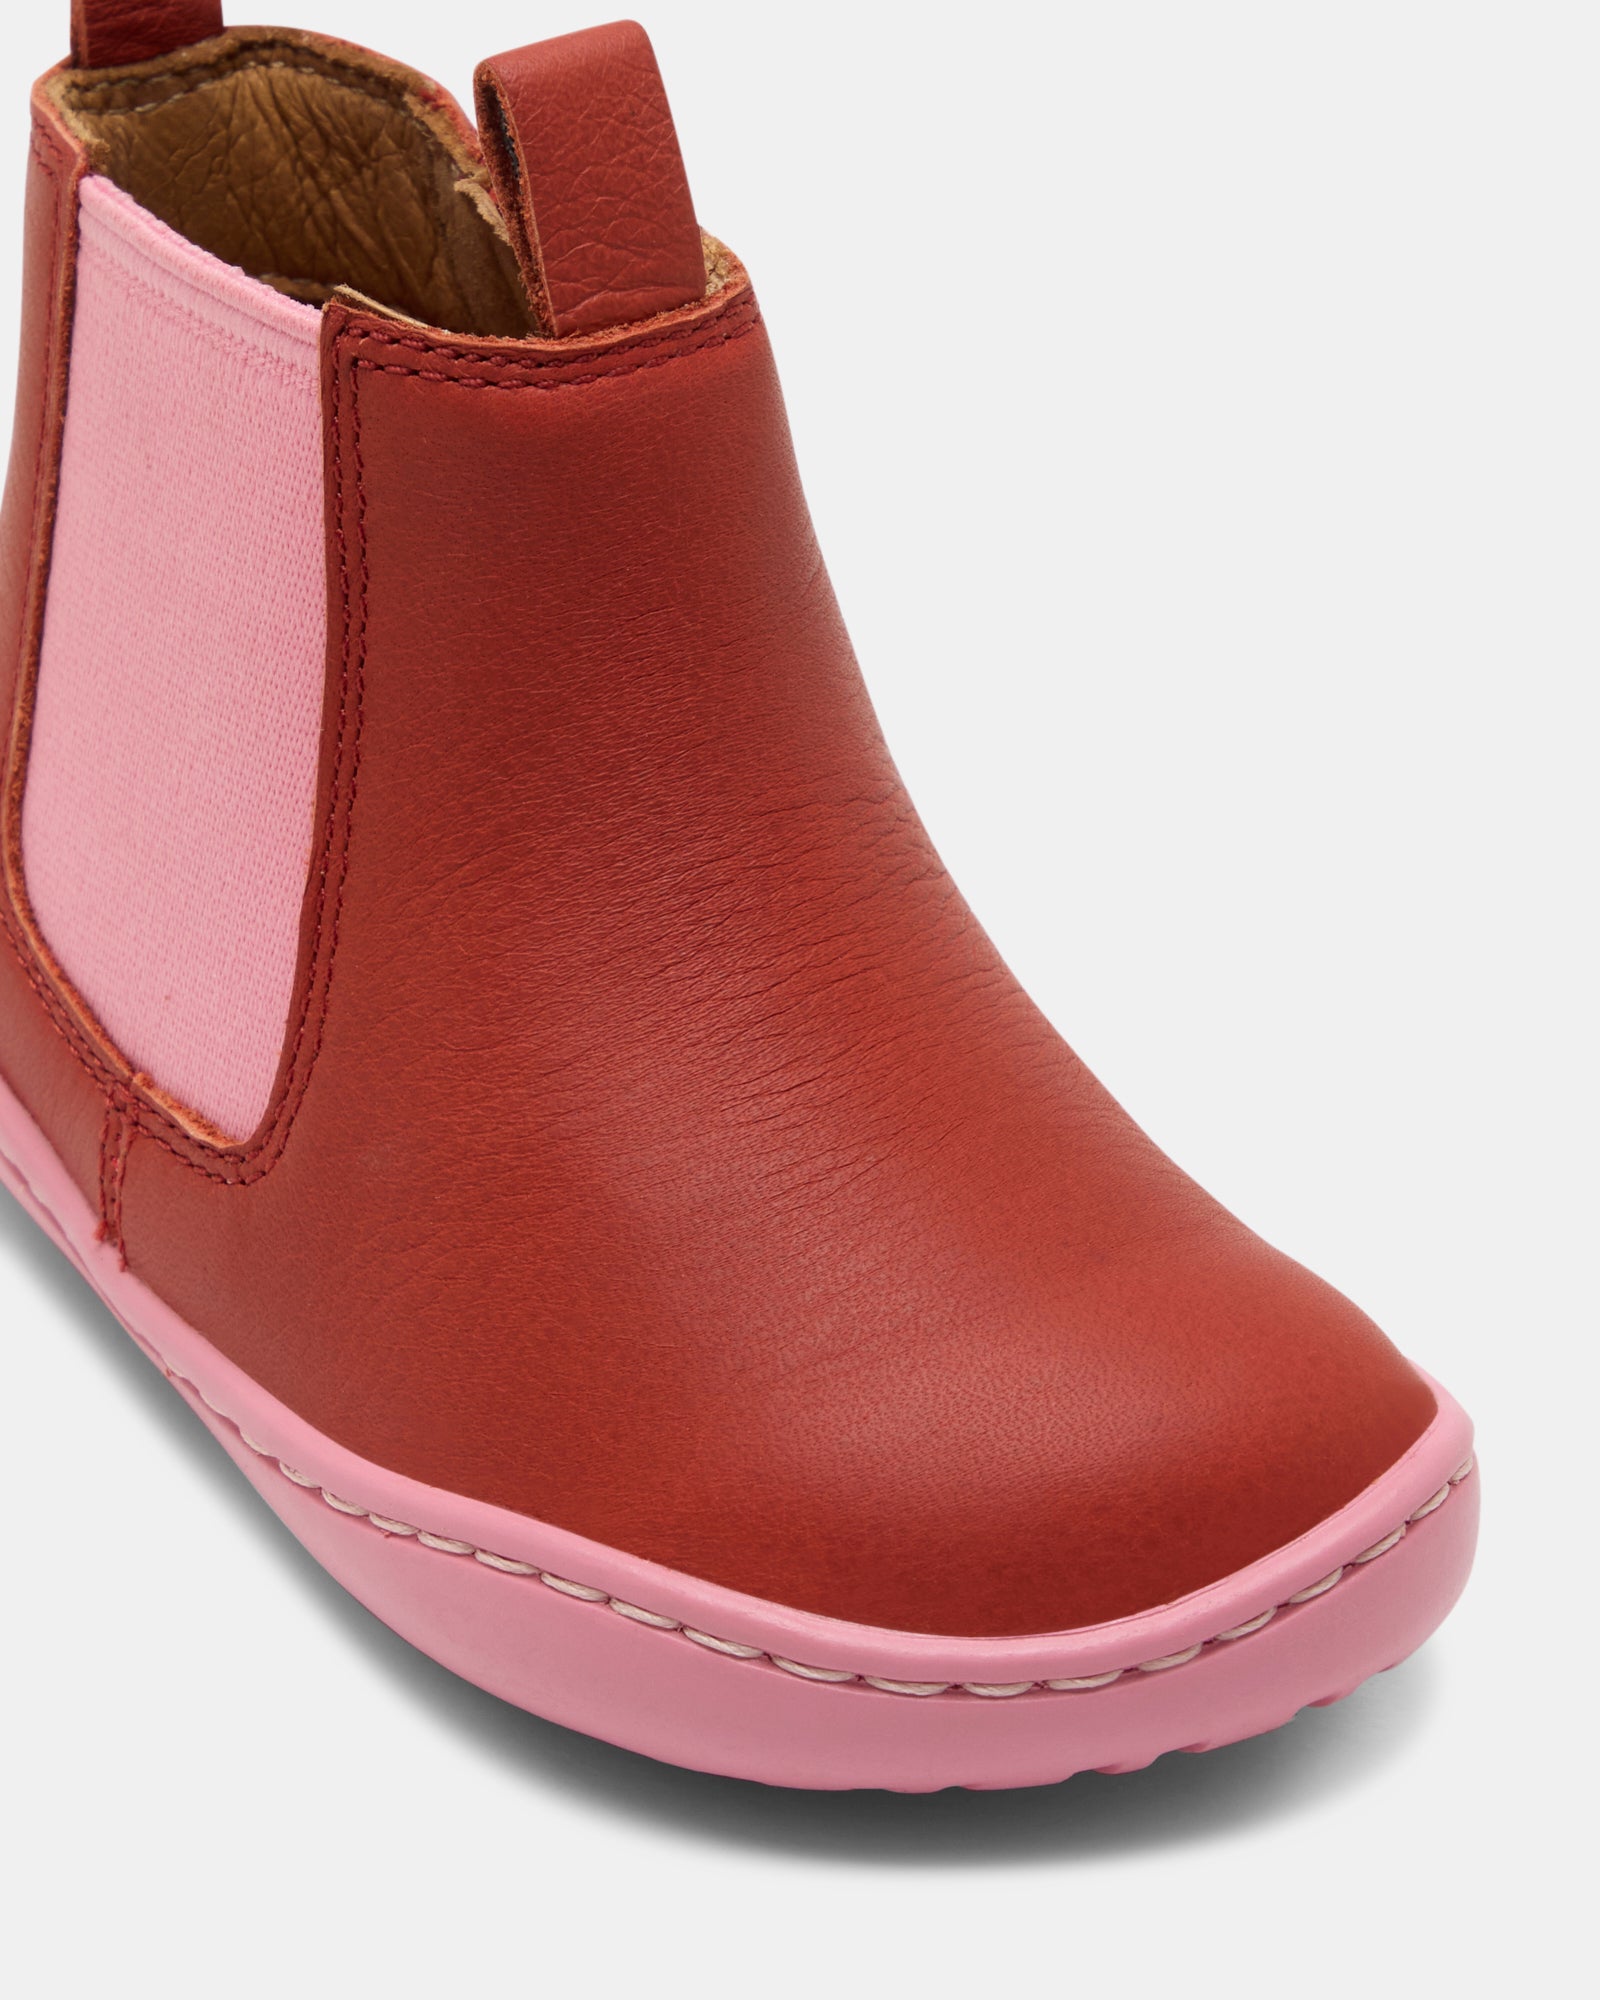 Peu Cami Gusset Boot Infant Red/Pink